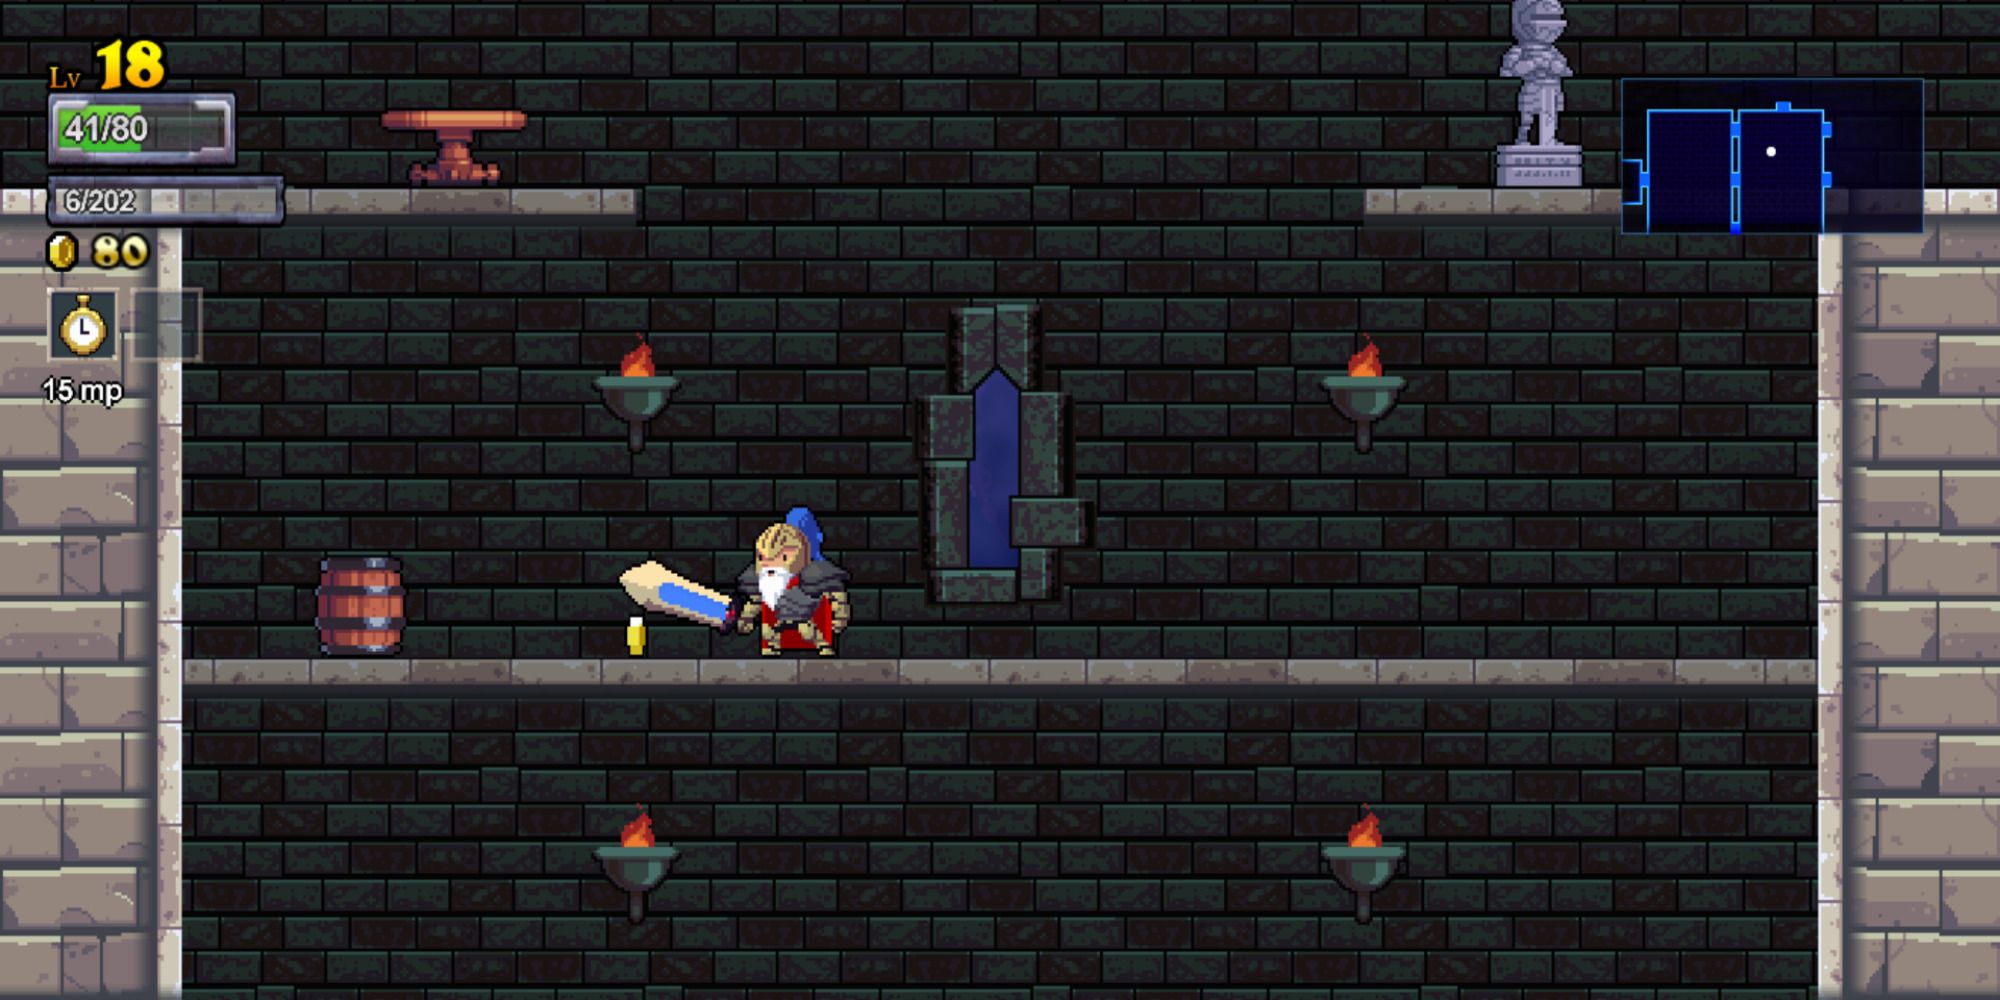 knight character about to pick up gold in castle in rogue legacy